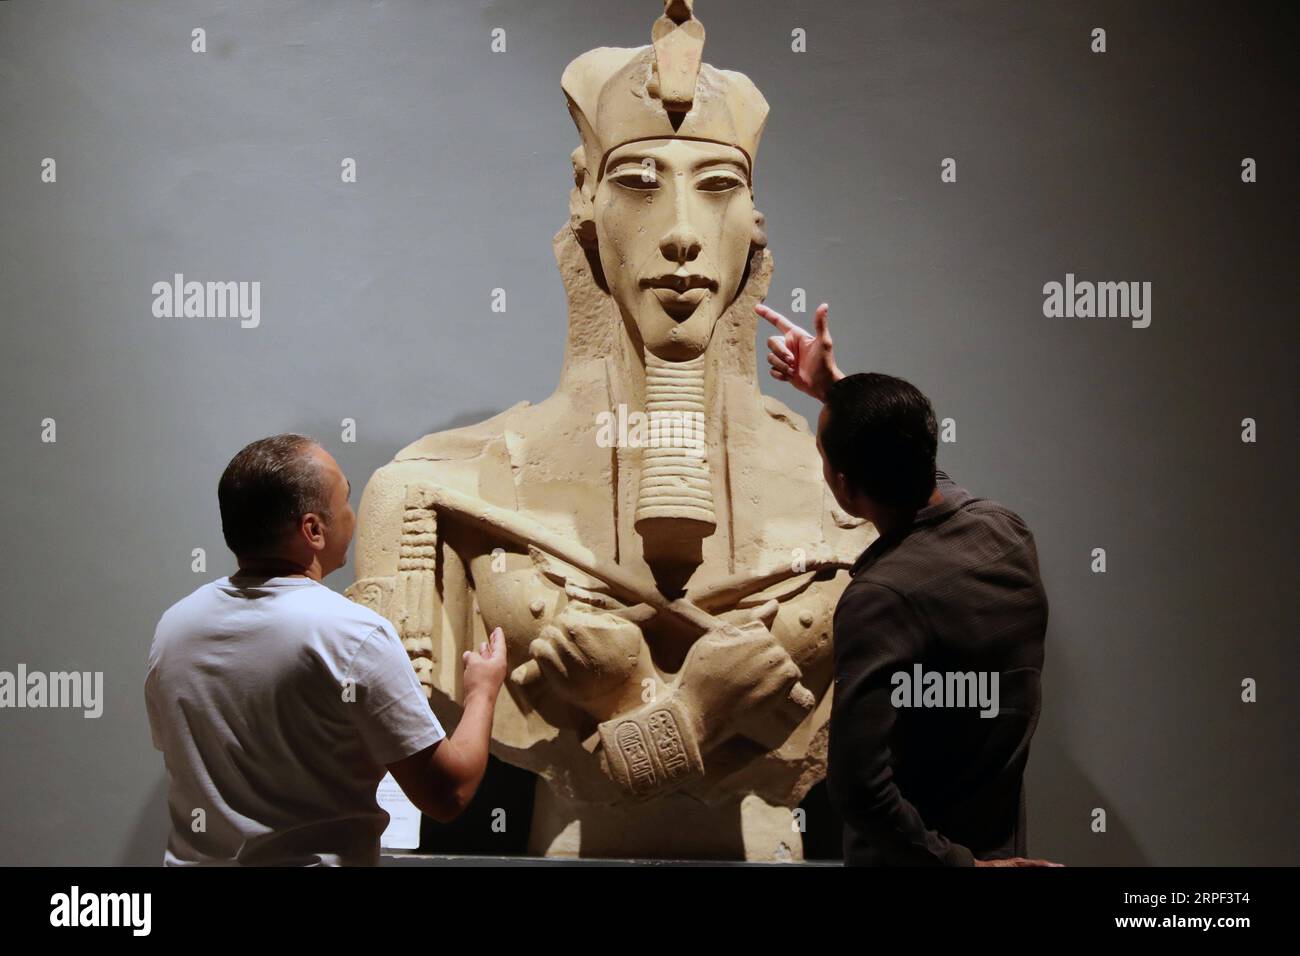 (190911) -- LUXOR (EGYPT), Sept. 11, 2019 -- A statue of King Akhenaton is displayed in Luxor Museum in Luxor, Egypt on Sept. 8, 2019. The two-floor Luxor Museum overlooking the east bank of the Nile River in the heart of Upper Egypt s monument-rich city of Luxor, a capital in ancient Egypt known as Thebes, is a unique landmark for exploring the history of ancient Egypt through different eras. ) EGYPT-LUXOR-LUXOR MUSEUM AhmedxGomaa PUBLICATIONxNOTxINxCHN Stock Photo